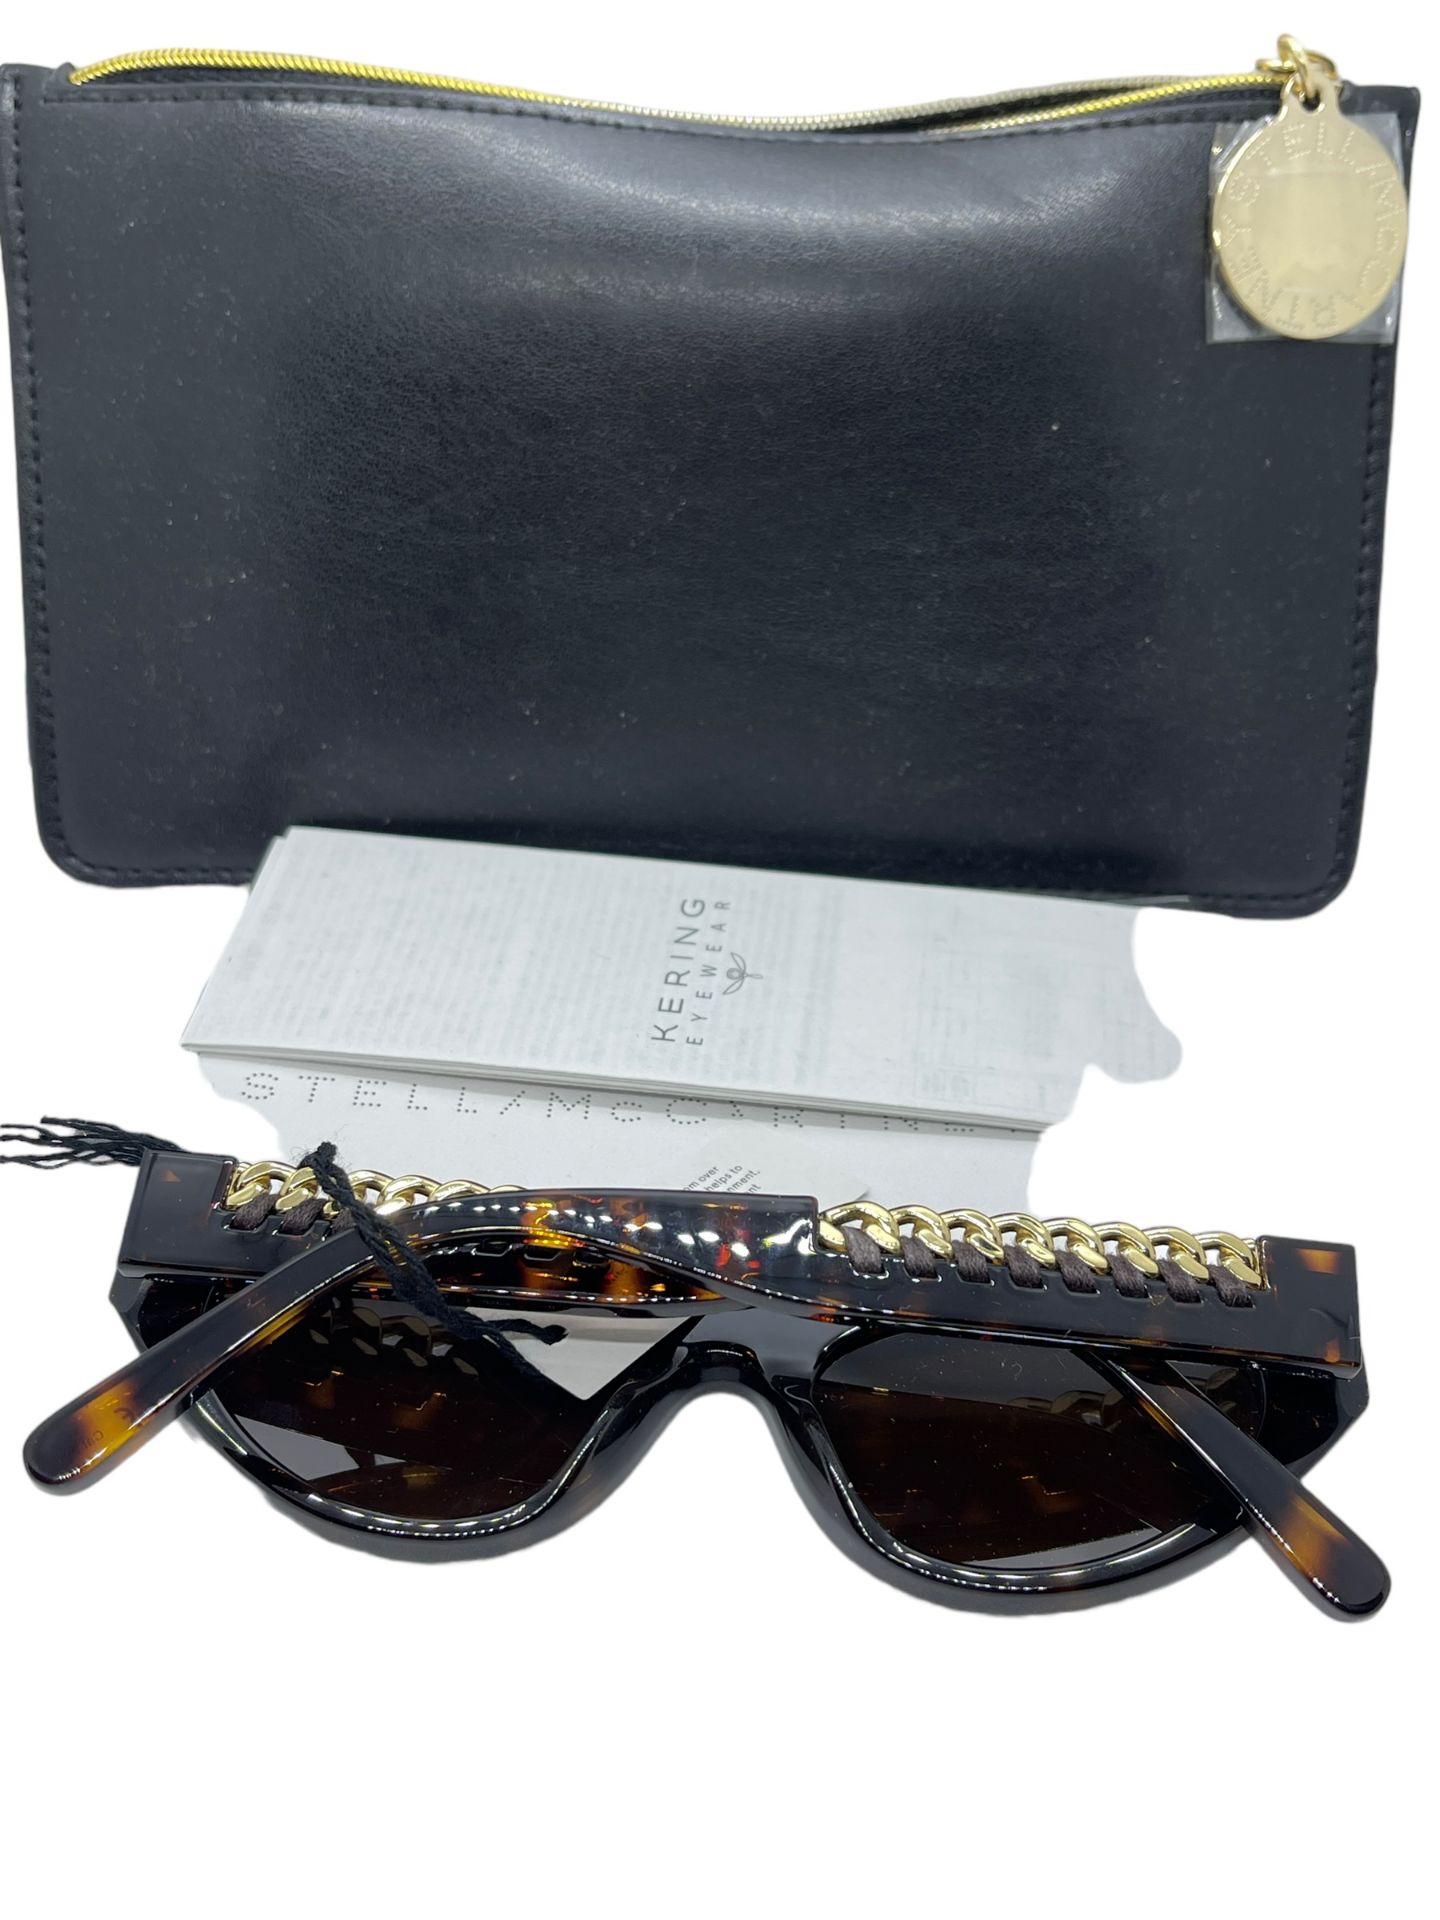 STELLA LLA. MARCARTNEY DESIGNER SUNGLASSES FROM A PRIVATE JET CHARTER. XDEMO - Image 4 of 6